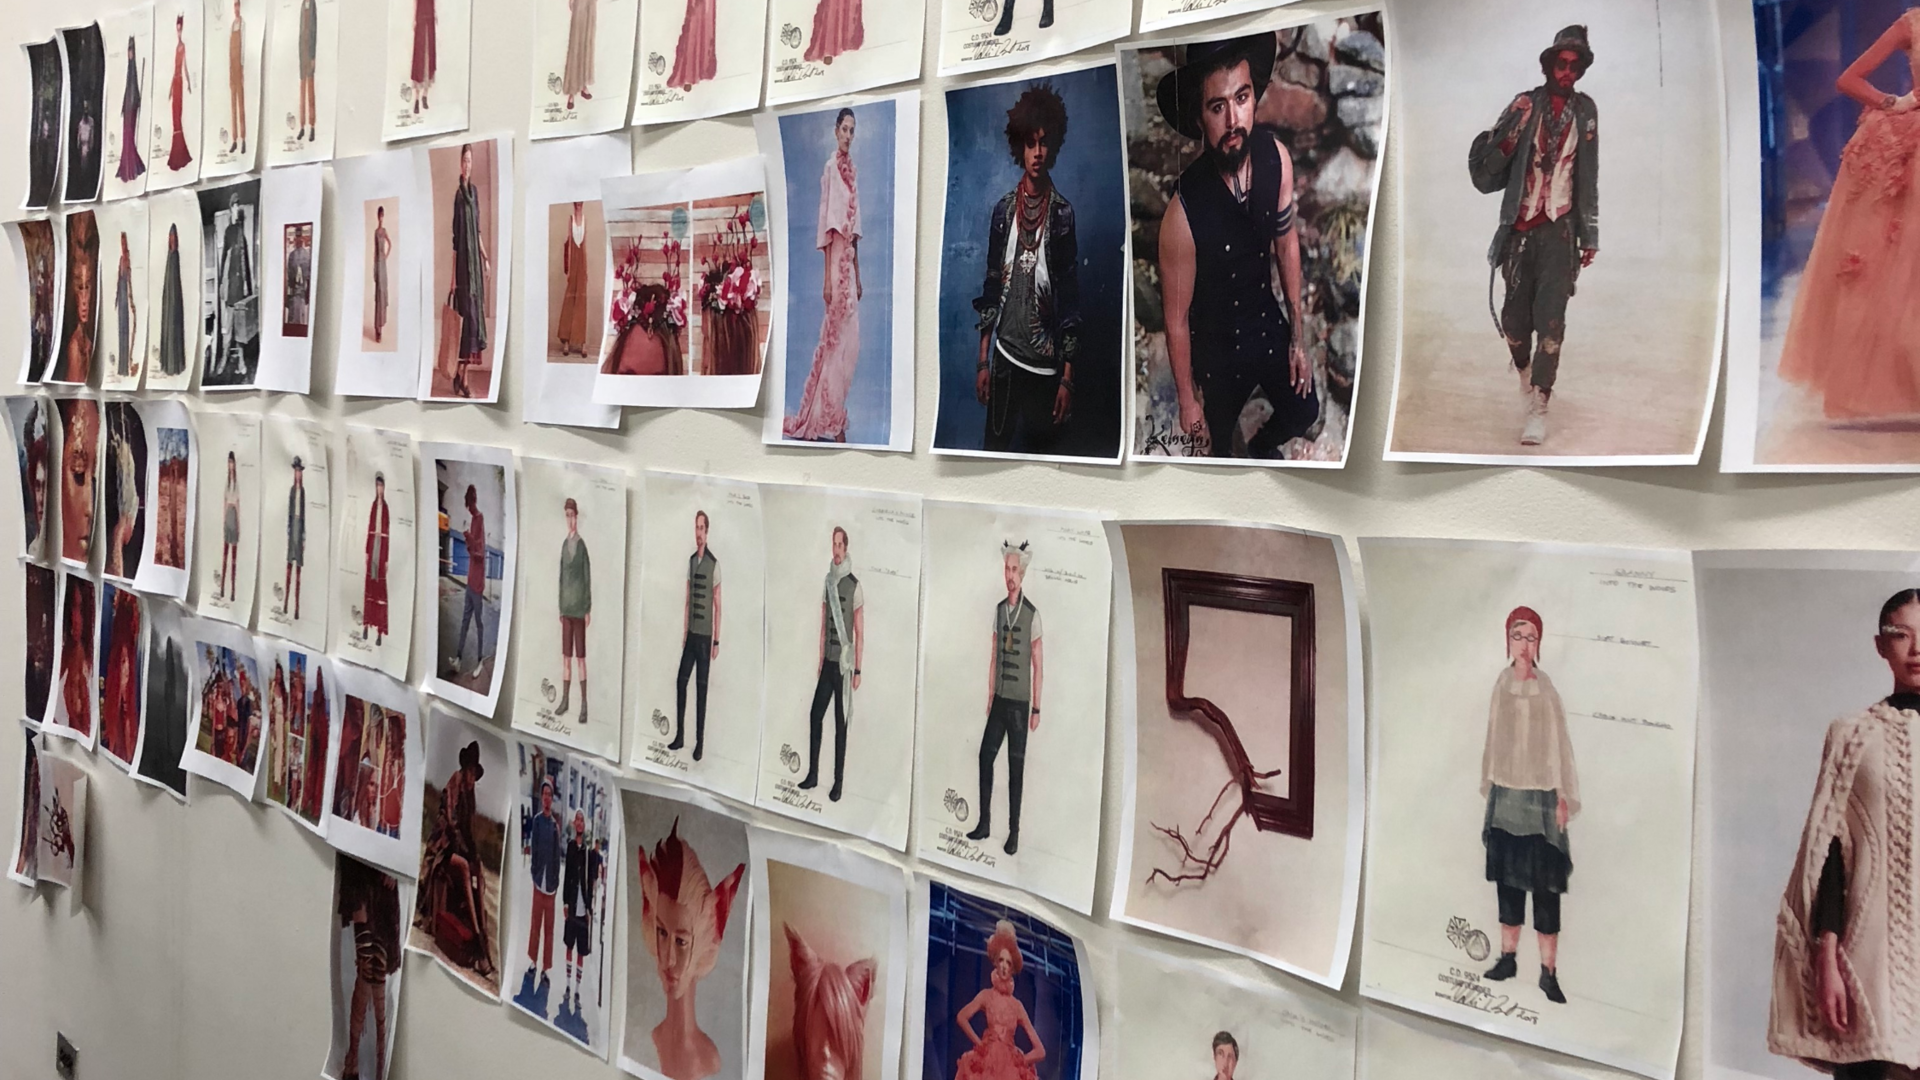 costume concepts posted on a wall